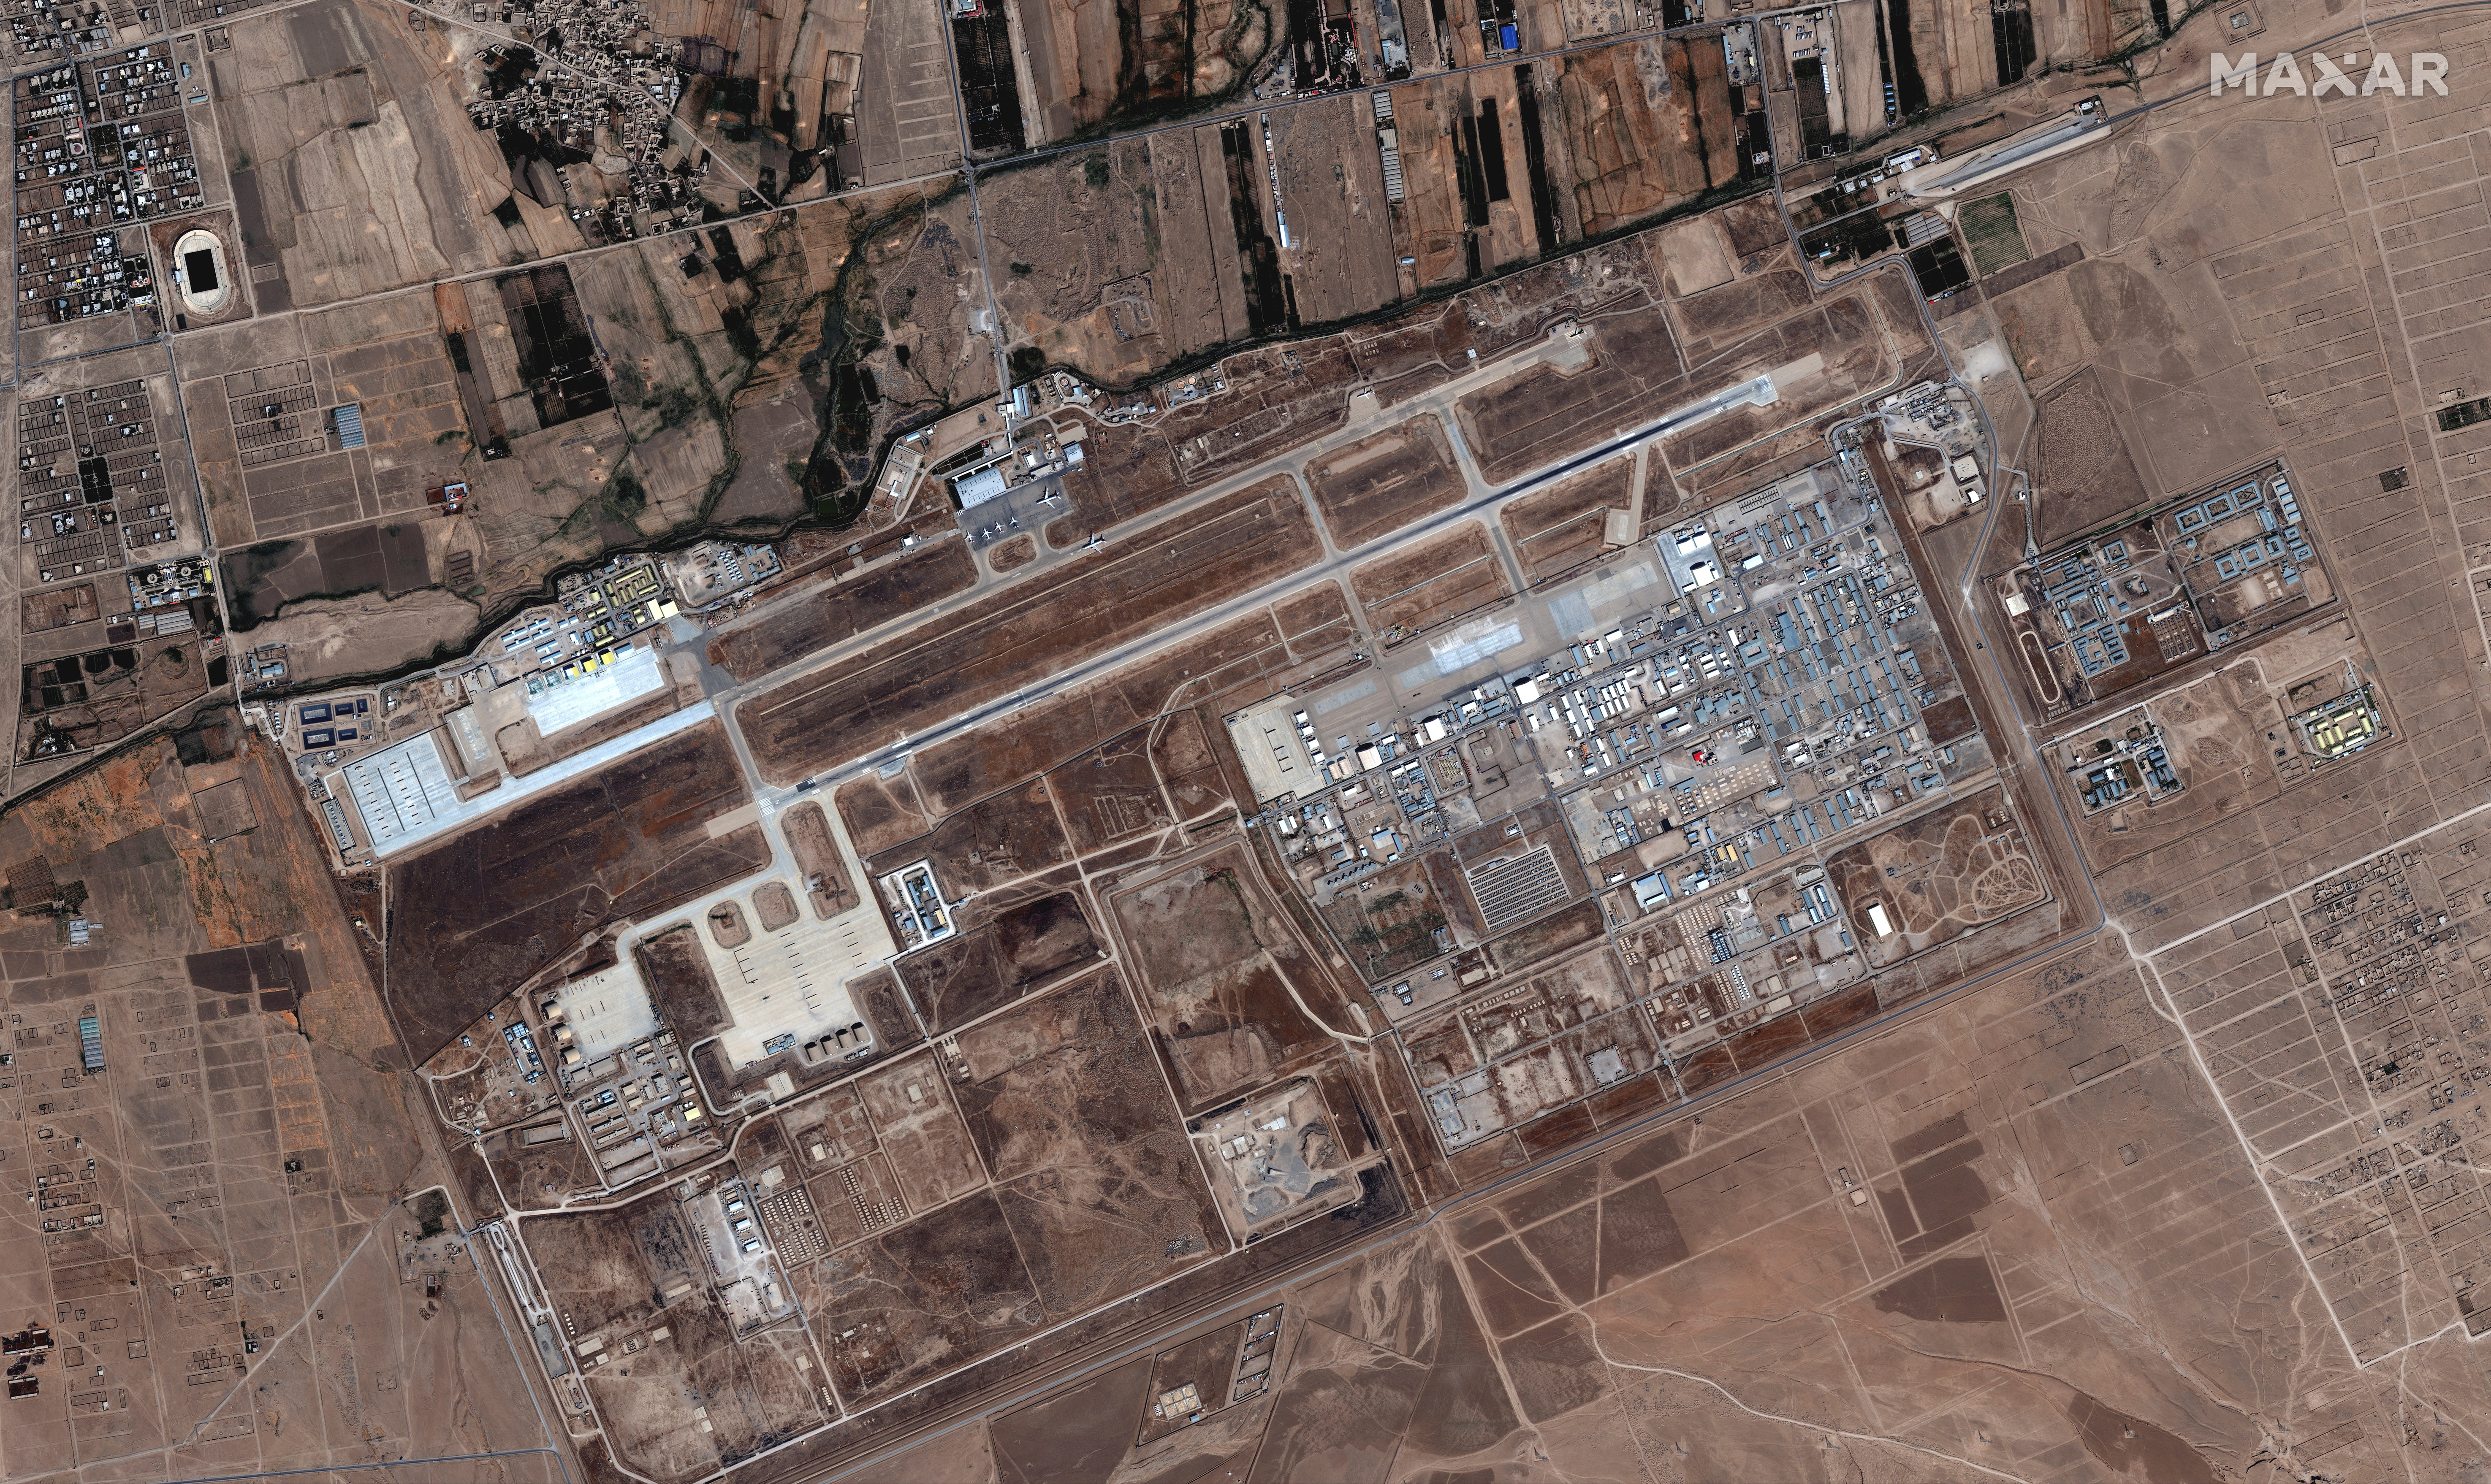 Six commercial airplanes are seen near the main terminal of the Mazar-i-Sharif airport